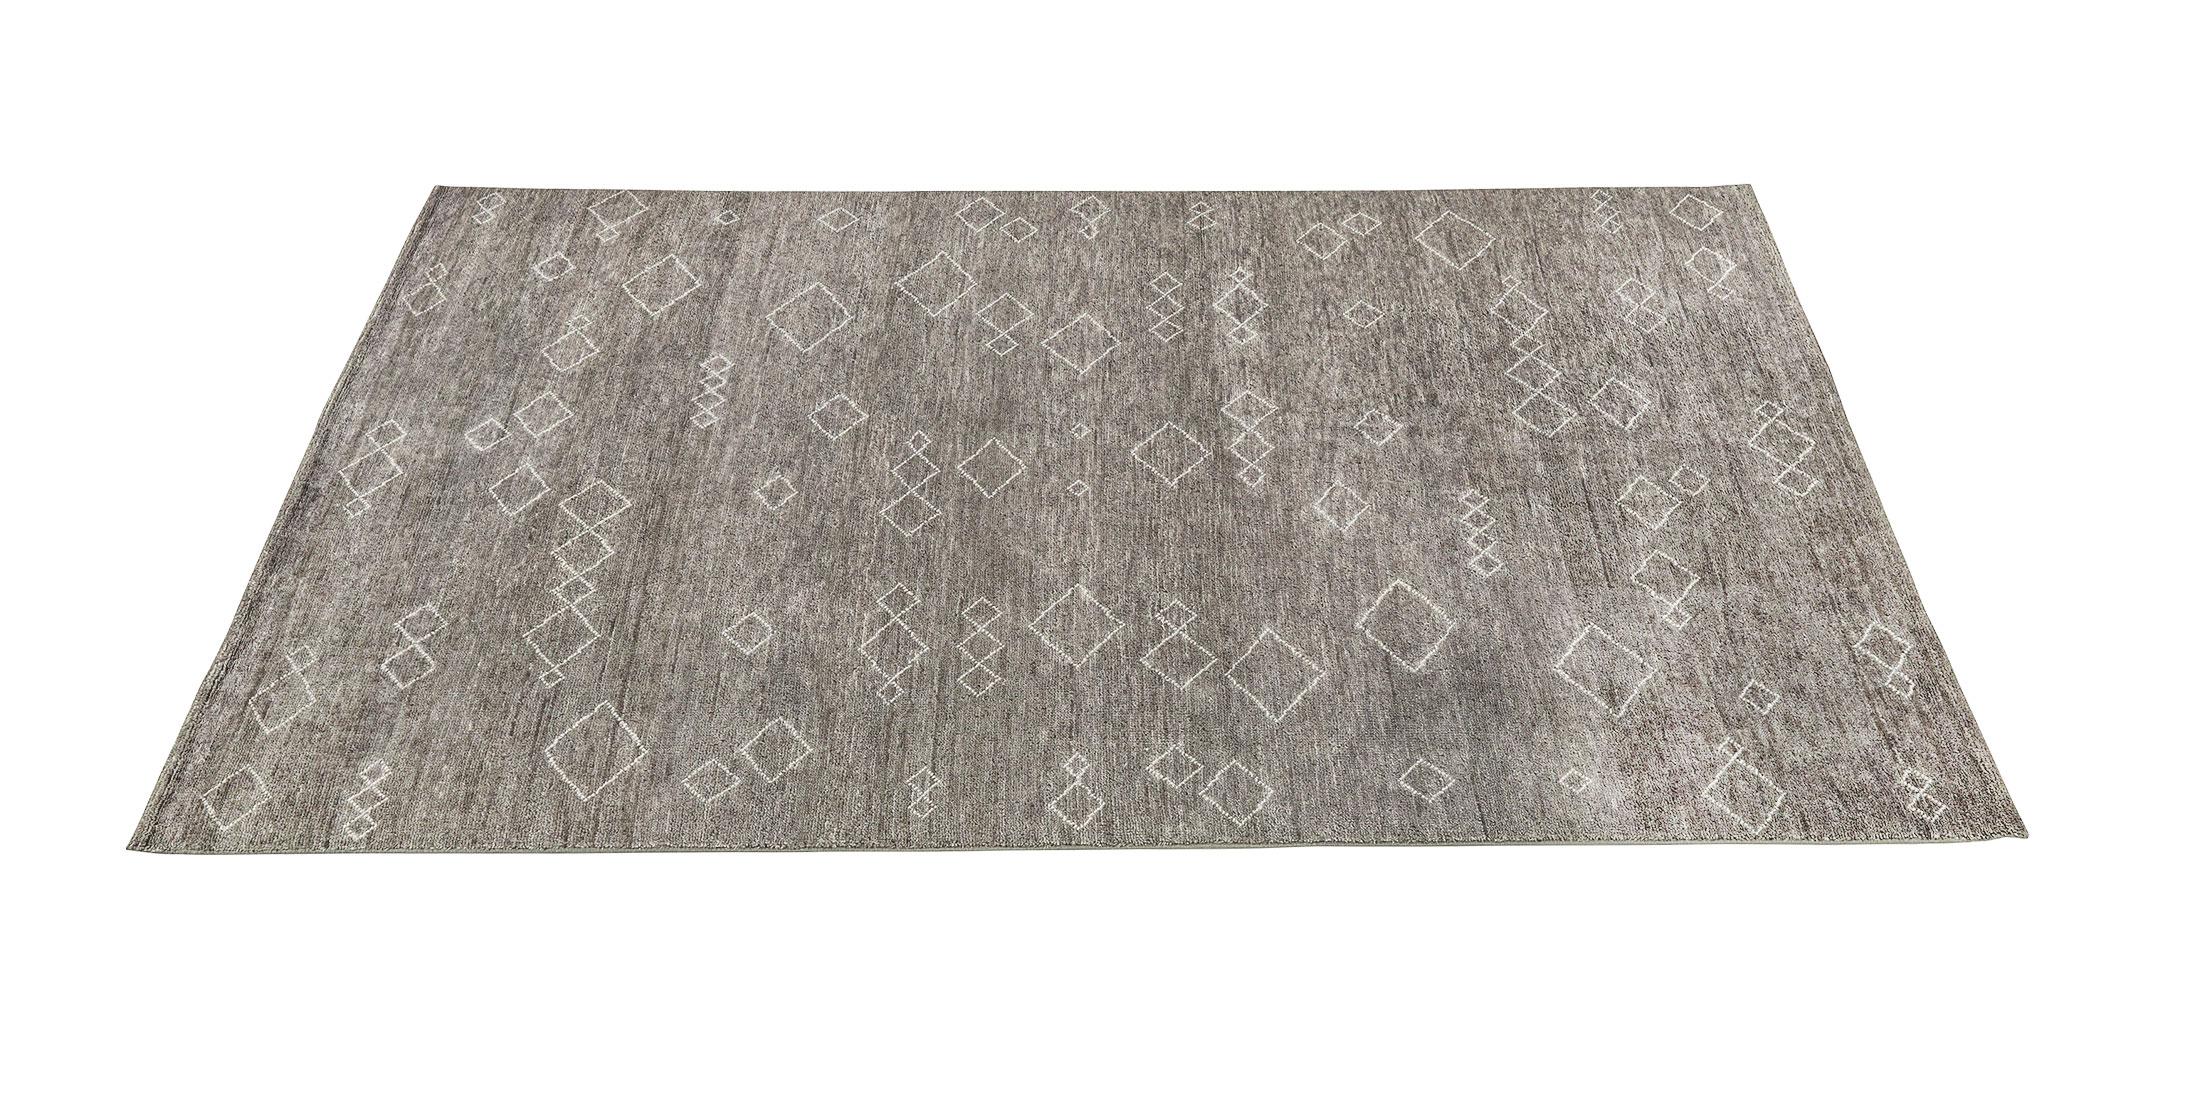 For Sale: Gray (Graphite/Sand) Ben Soleimani Arisa Rug– Moroccan Hand-knotted Plush Wool Carbon/Mist 6'x9' 2